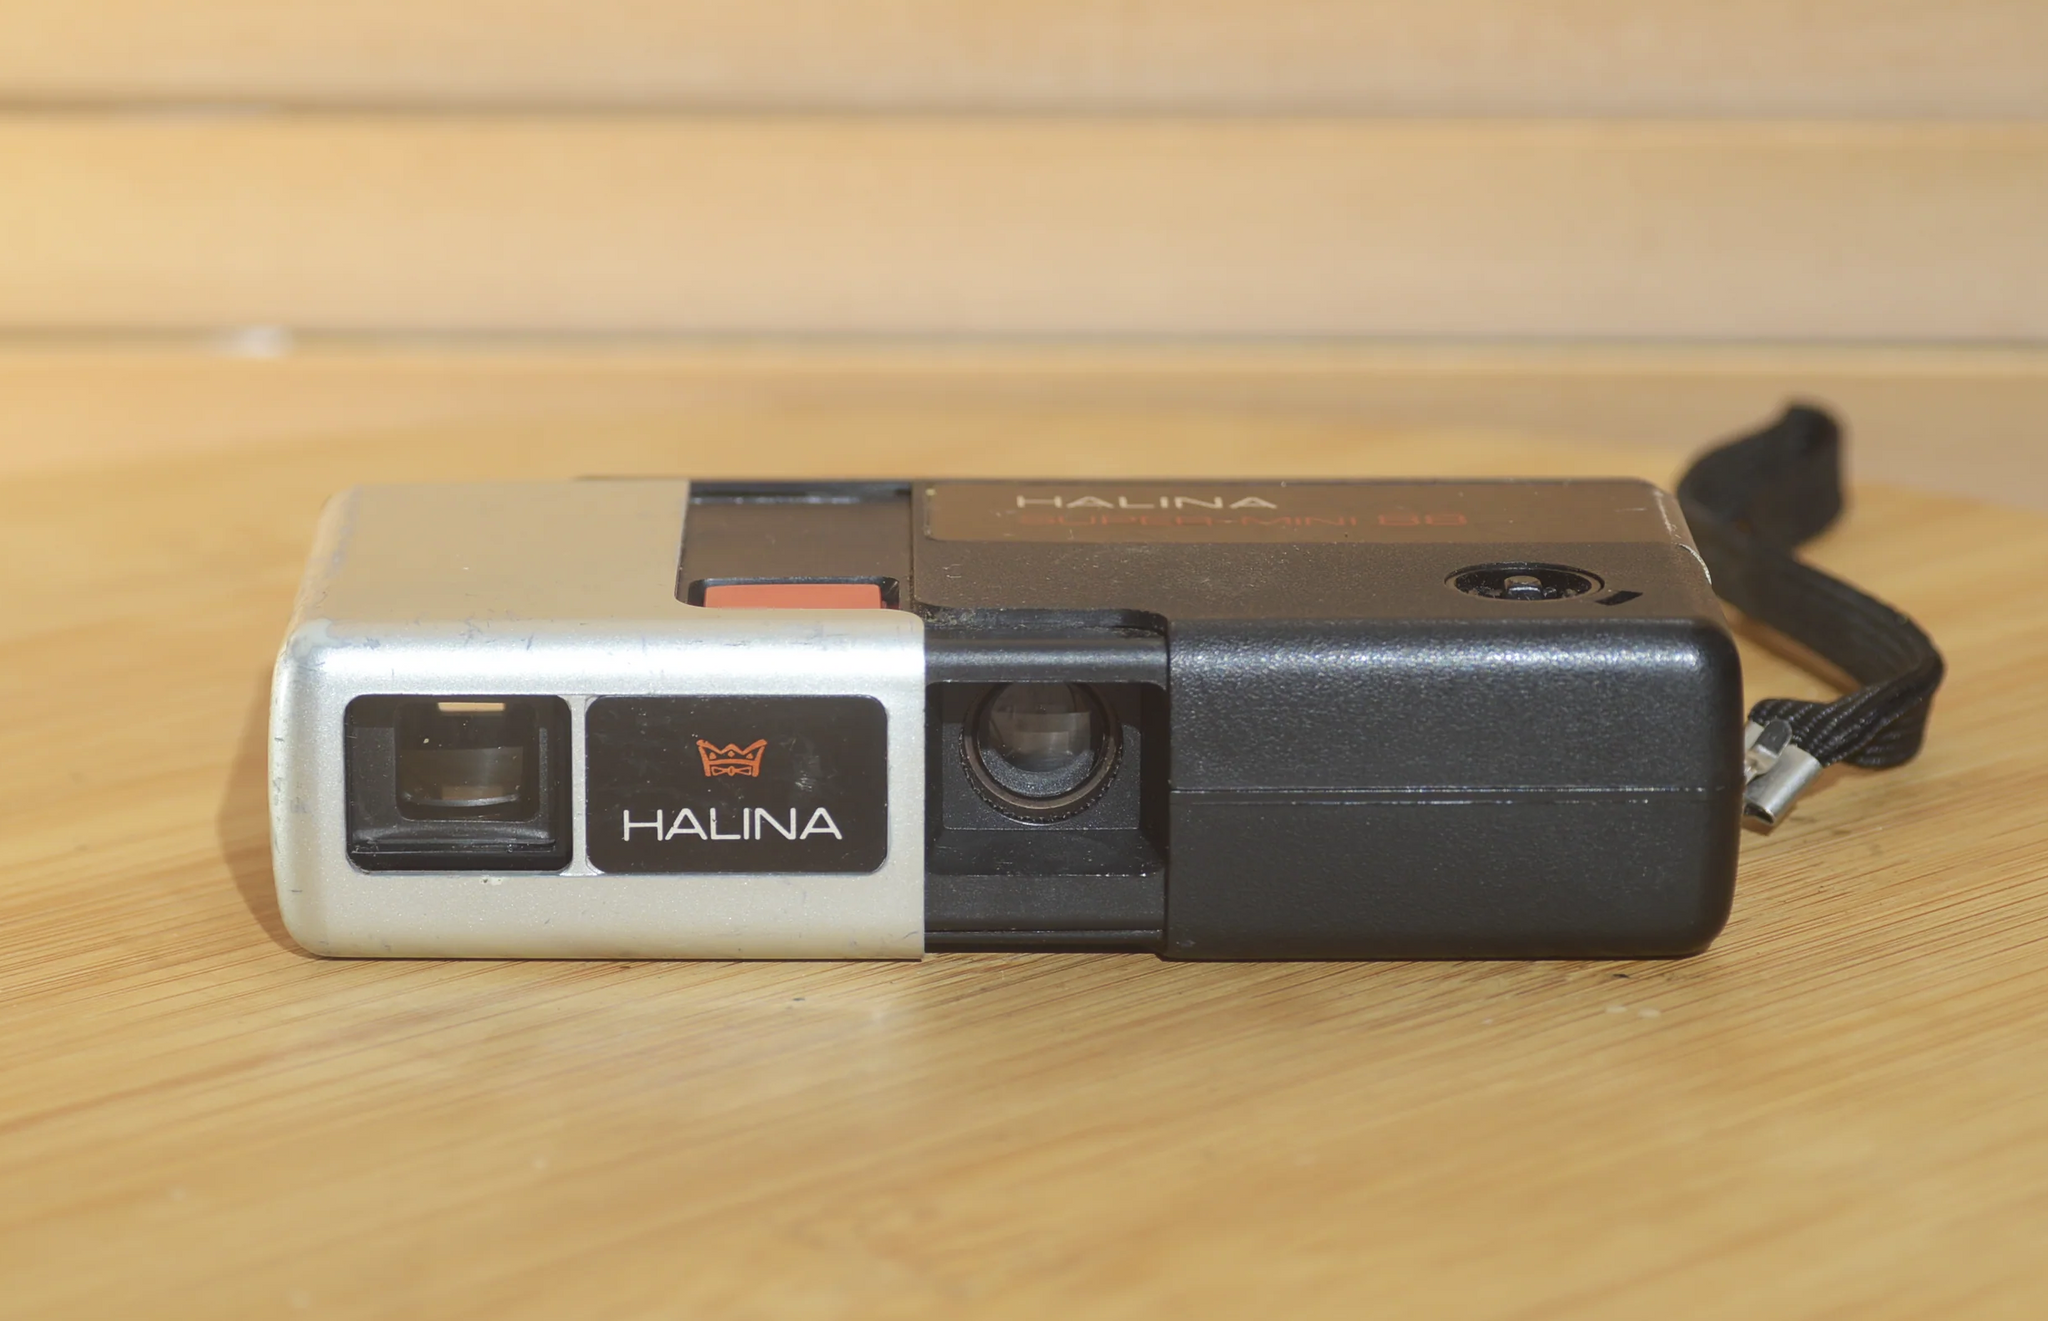 Halina Super-Mini 88 Miniature 110mm Camera. 110mm photography is really making a come back! Perfect pocket size. - Rewind Cameras 